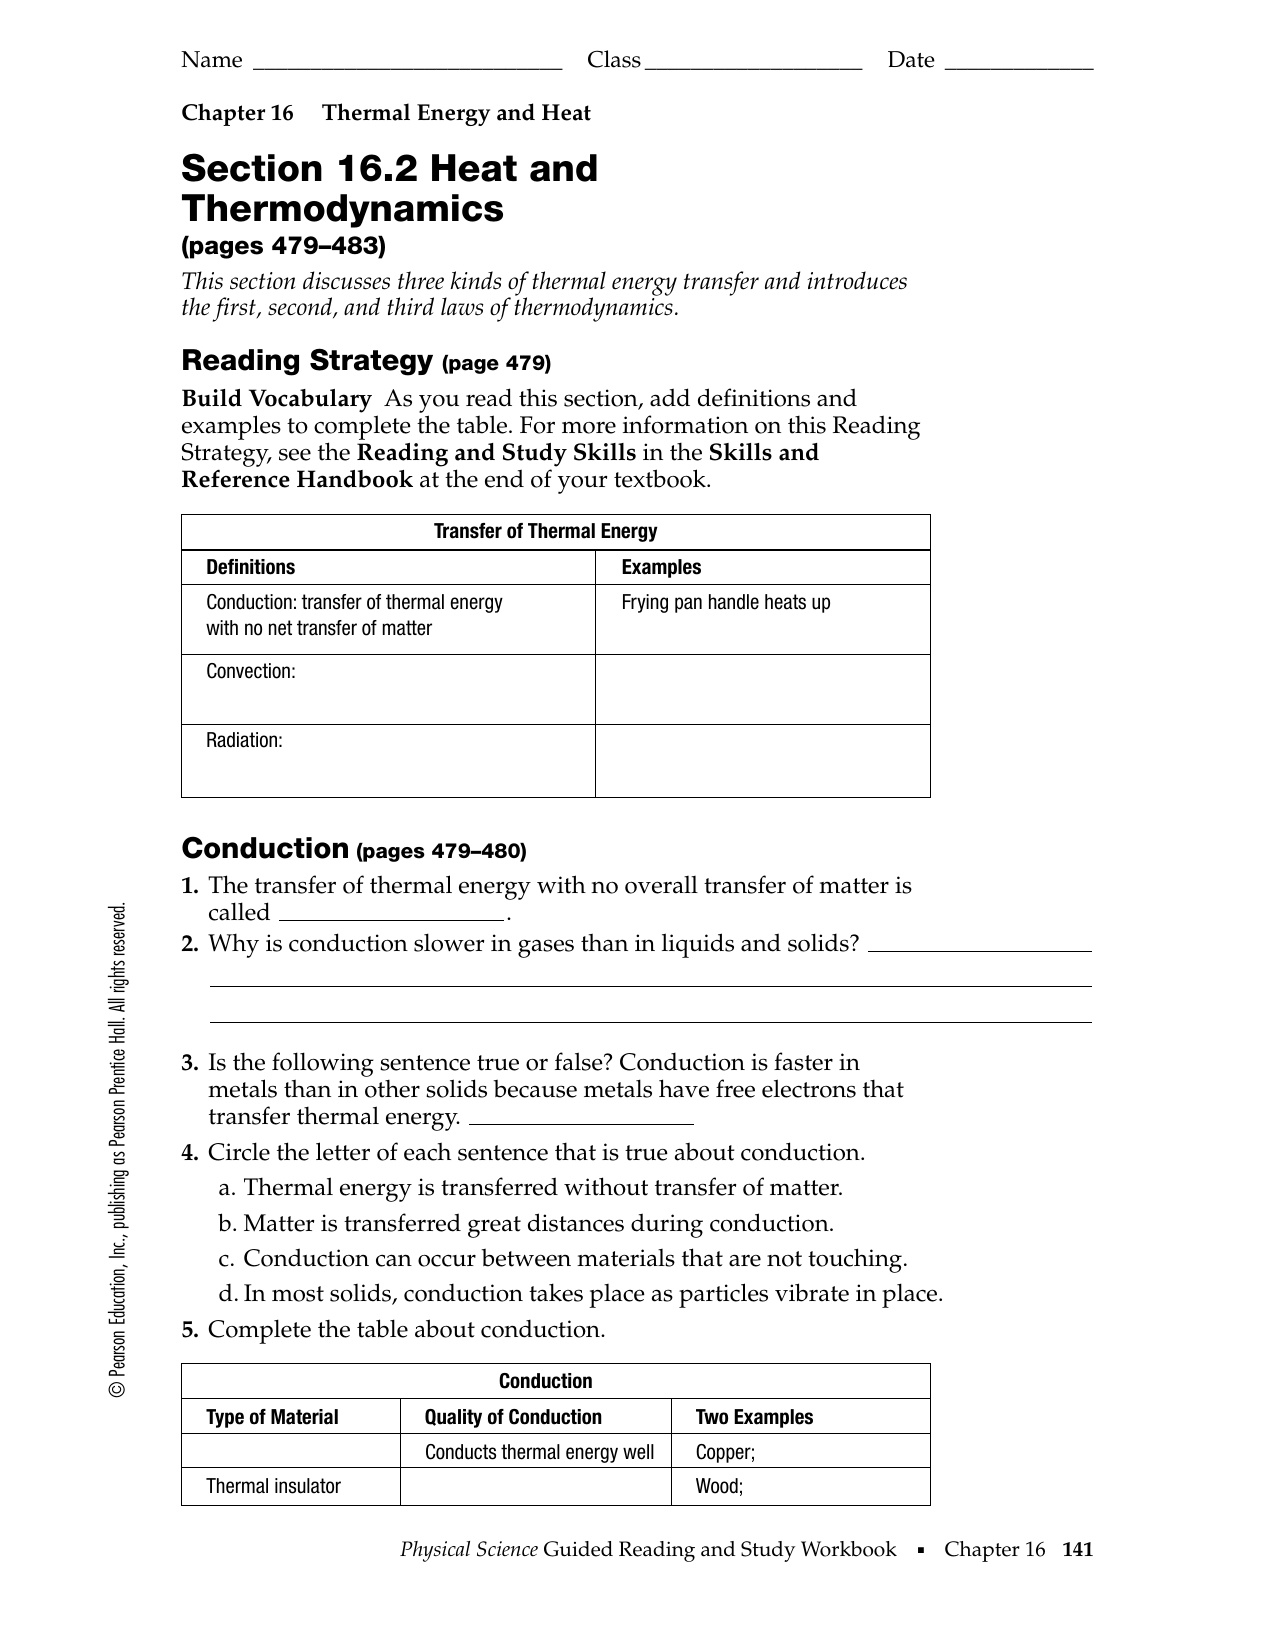 Section 162 Heat And Thermodynamics Along With Section 16 2 Heat And Thermodynamics Worksheet Answer Key